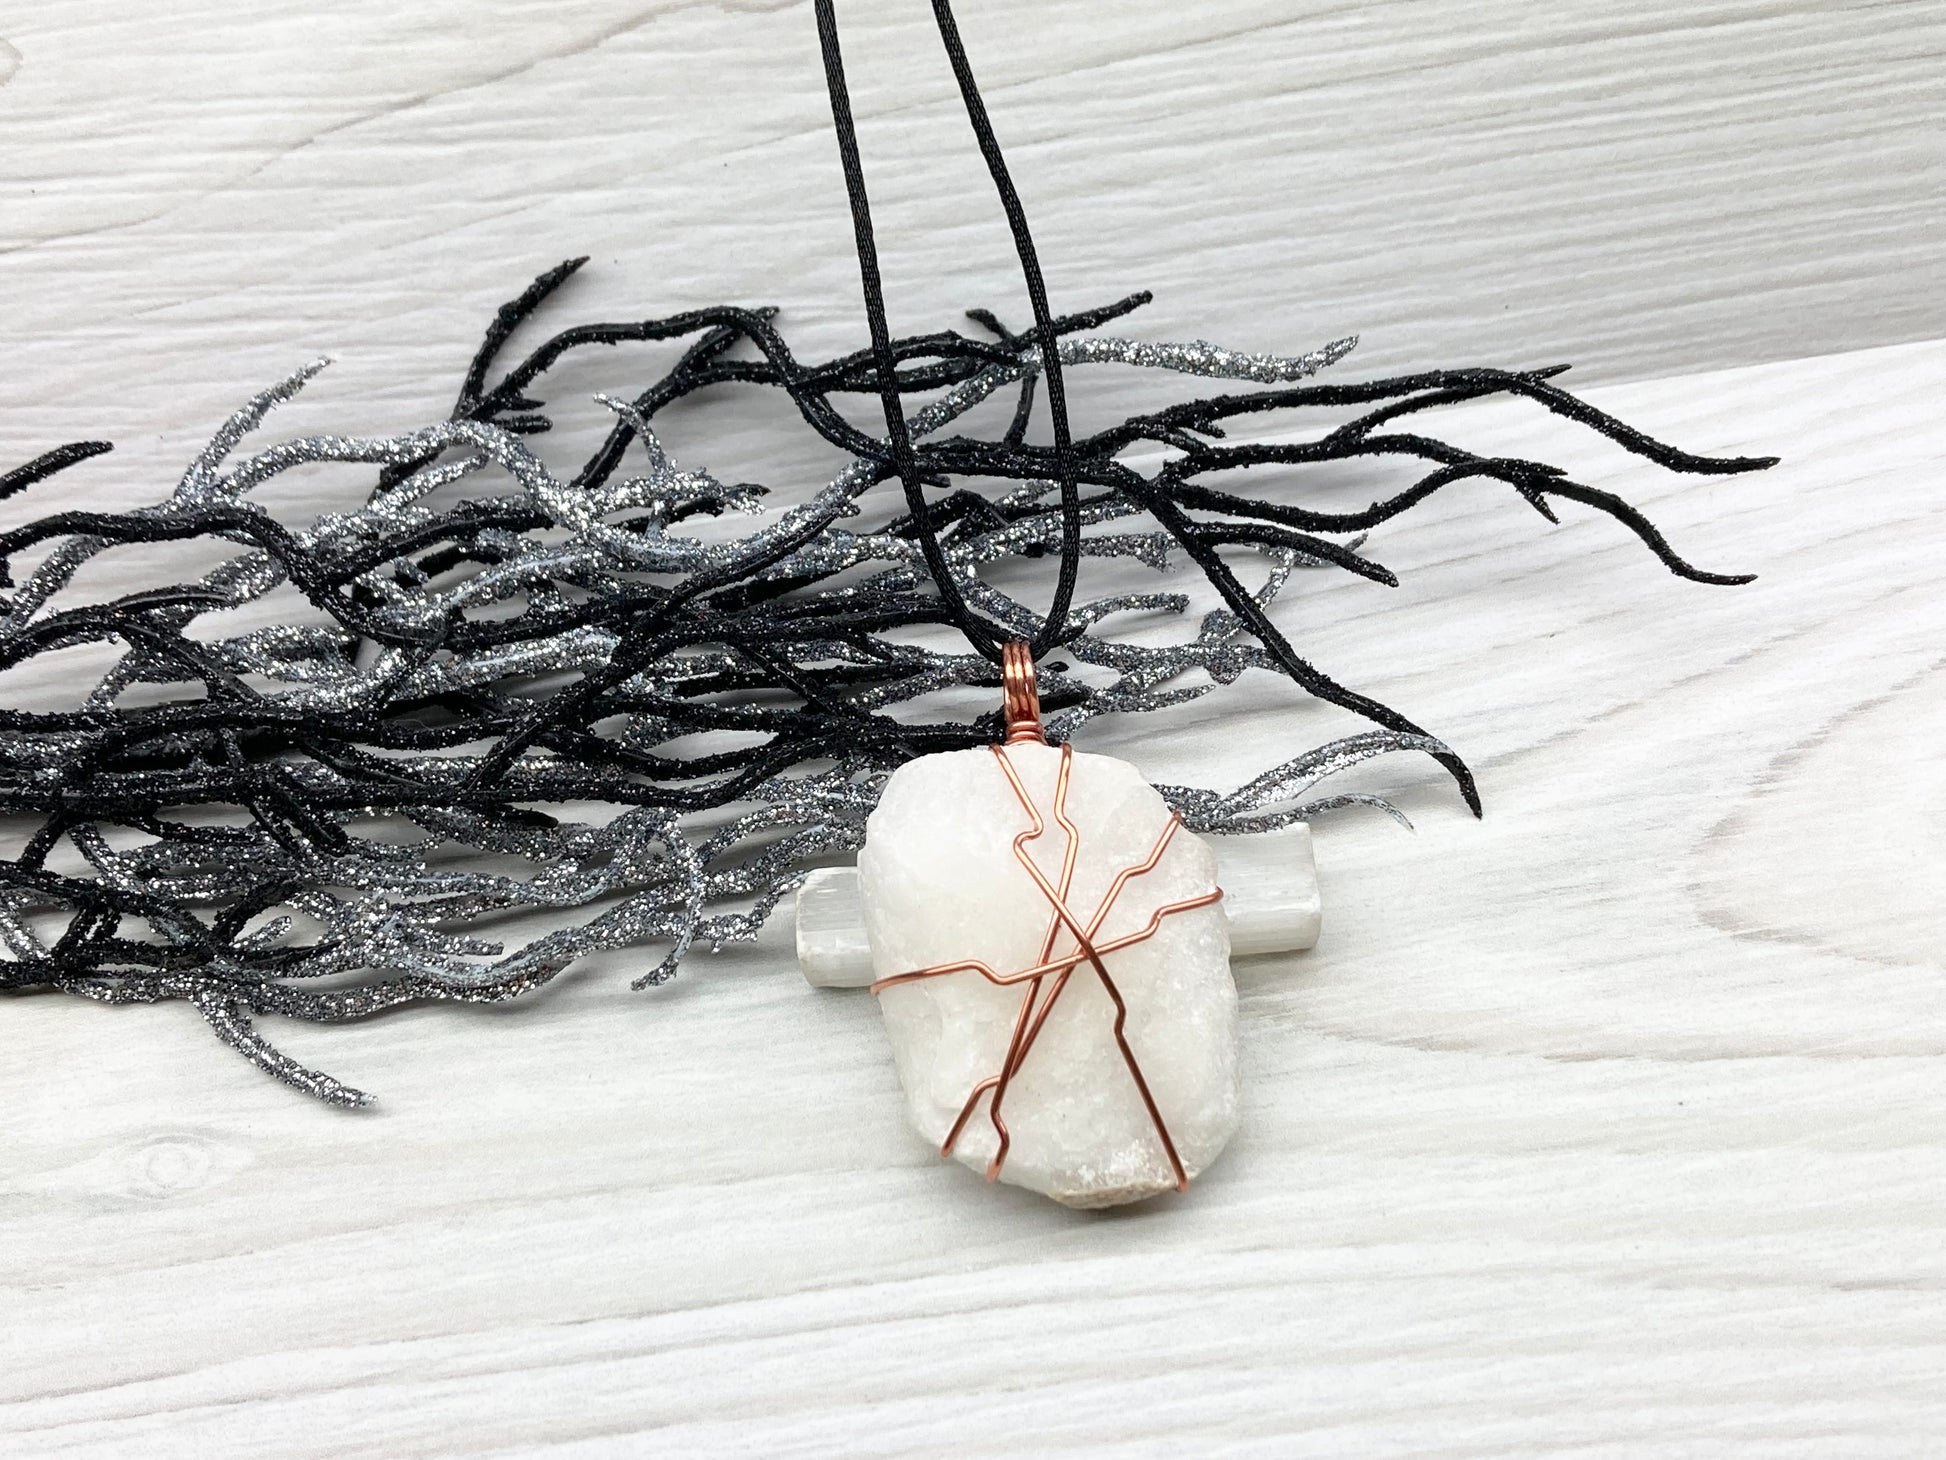 Raw White Onyx Necklace. Rough White Onyx Crystal Wrapped With Copper Wire. Pendant Comes On A Black Lobster Clasp Chain. 